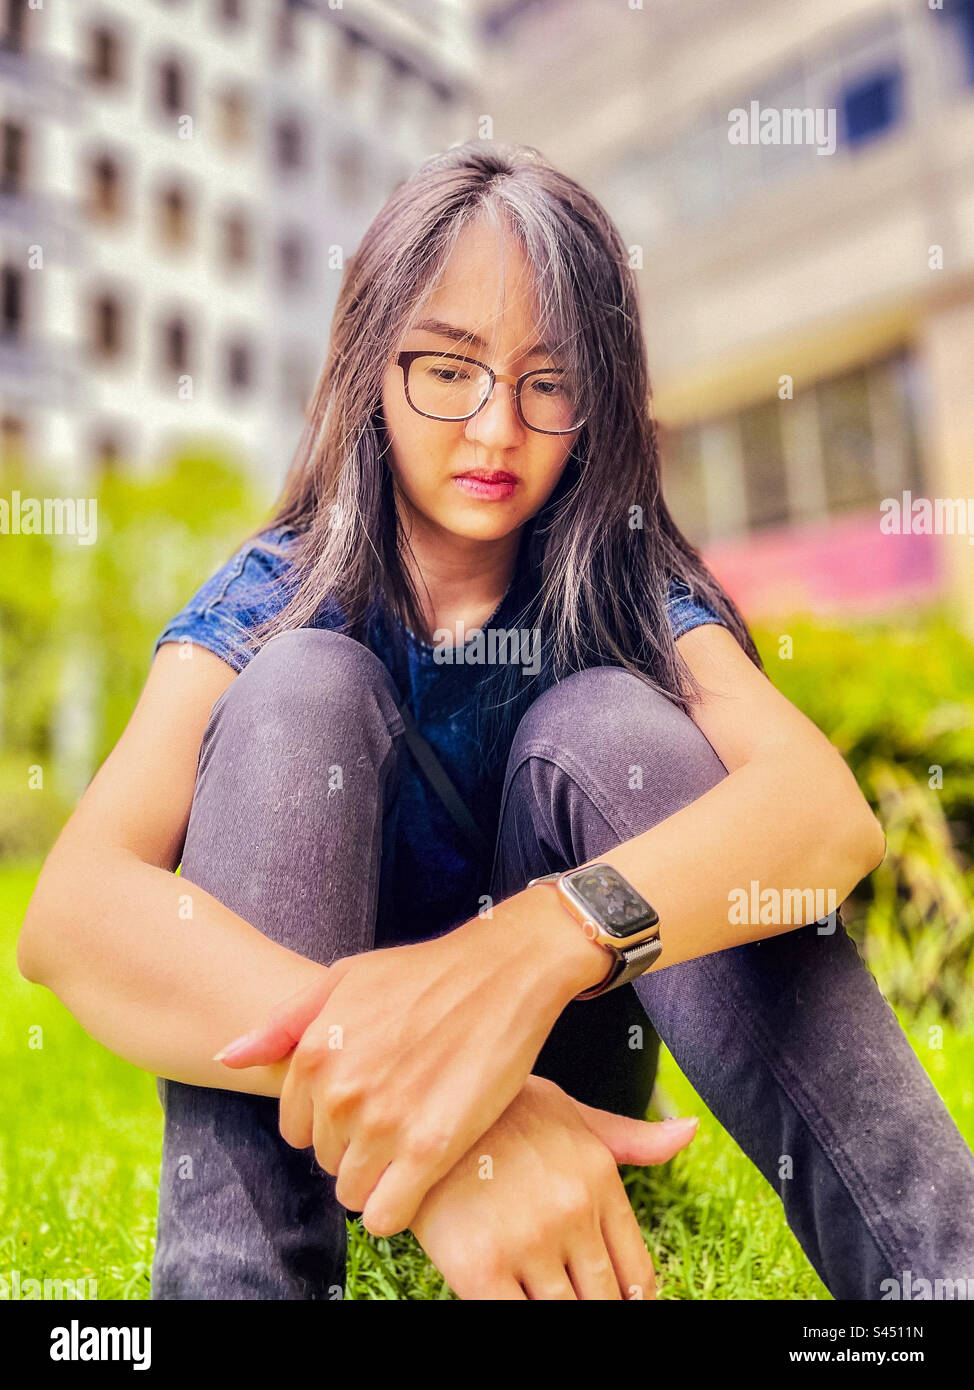 Emo girl. Portrait of young, long haired, Asian woman in eyeglasses sitting on the grass with arms around her legs. Focus on foreground. Silver hair streaks. Stock Photo